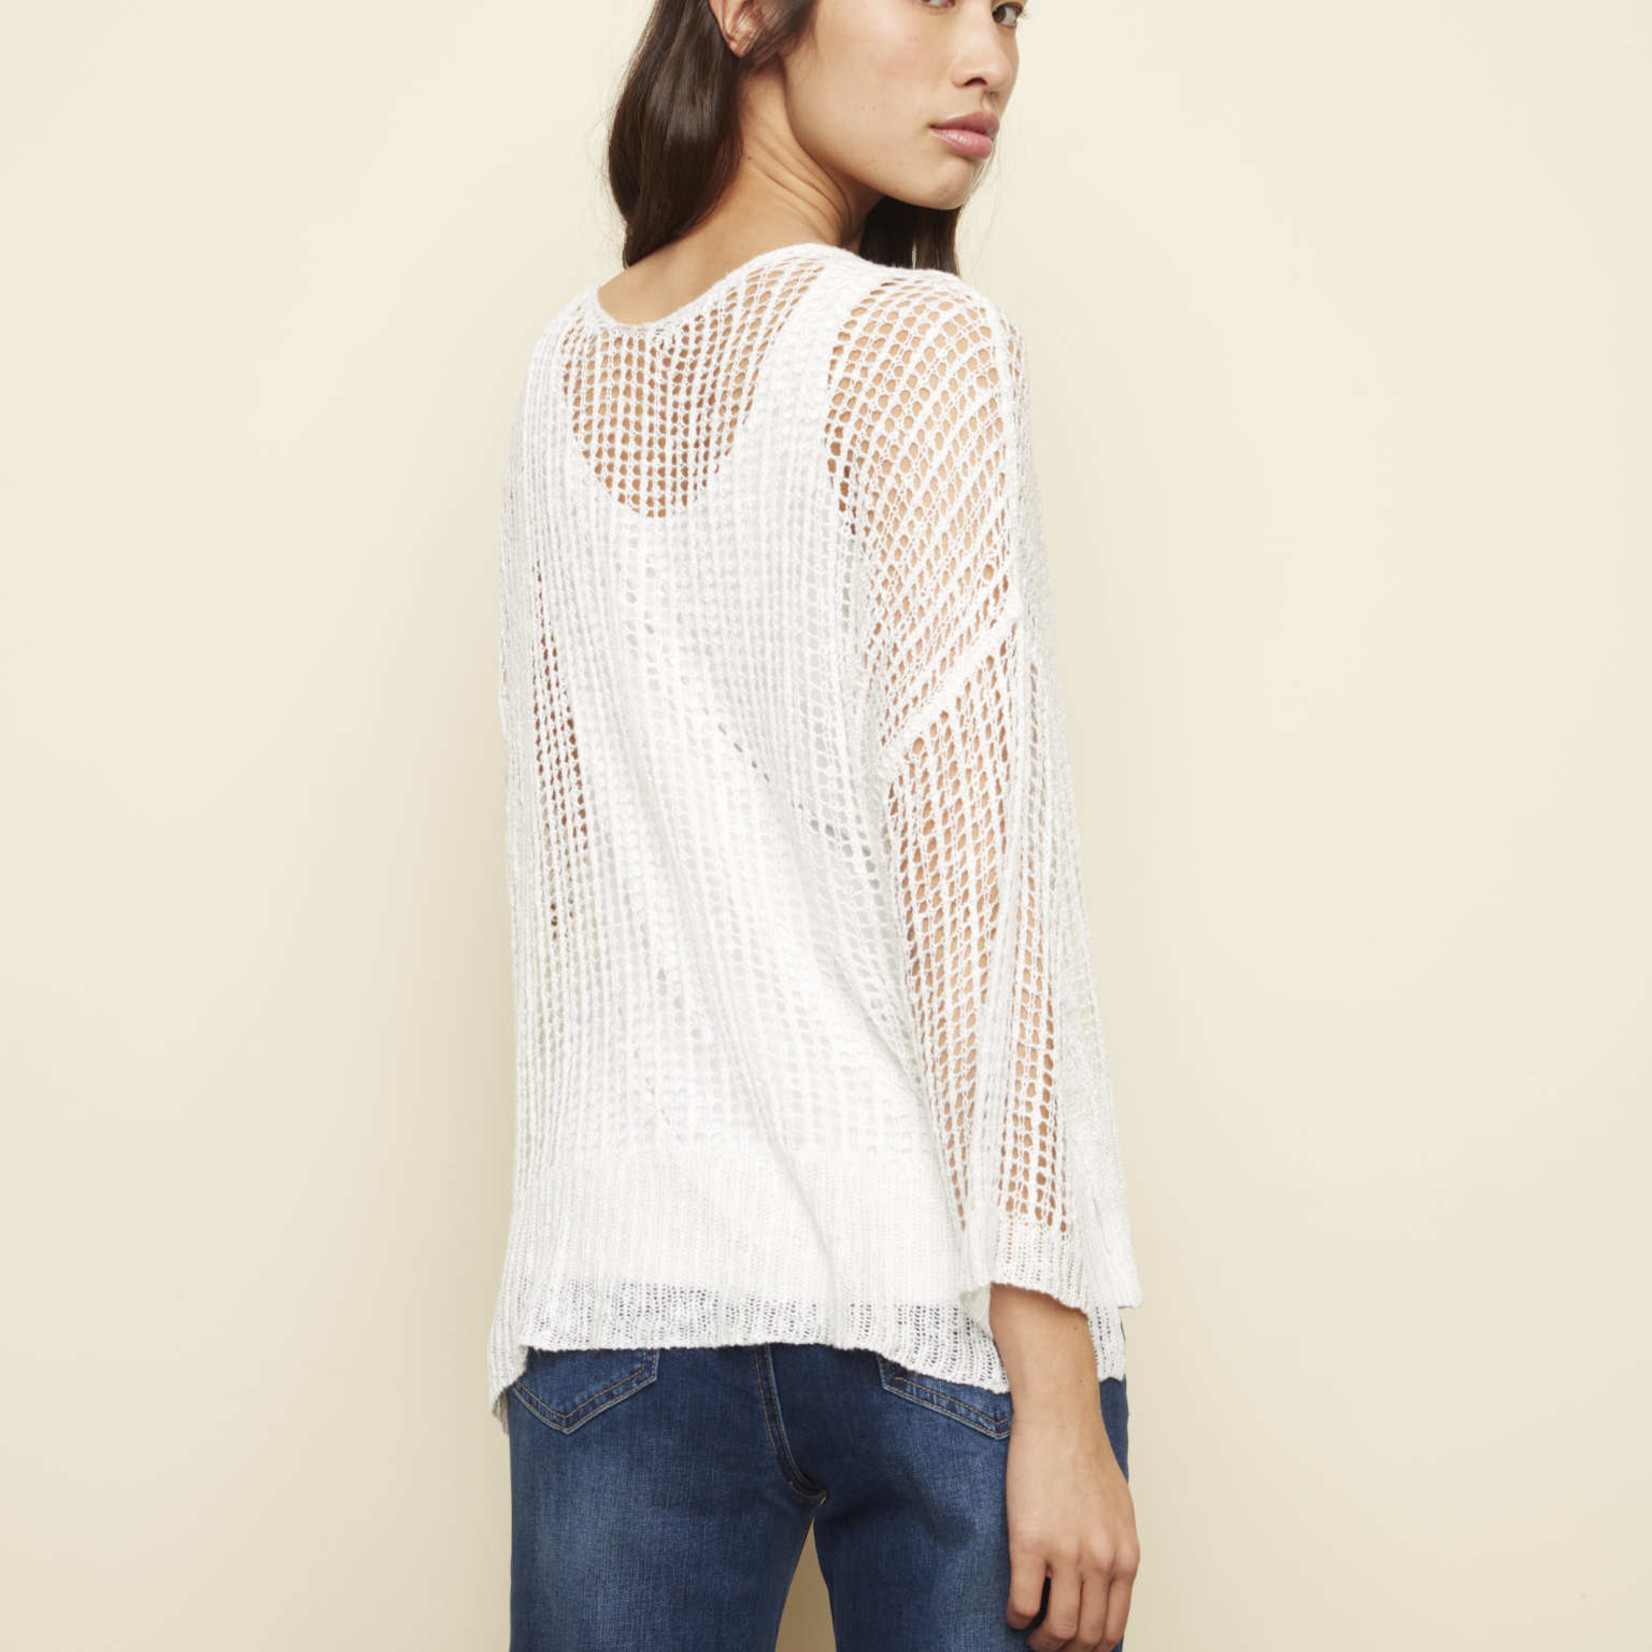 Charlie B Collection Crochet Knit Sweater